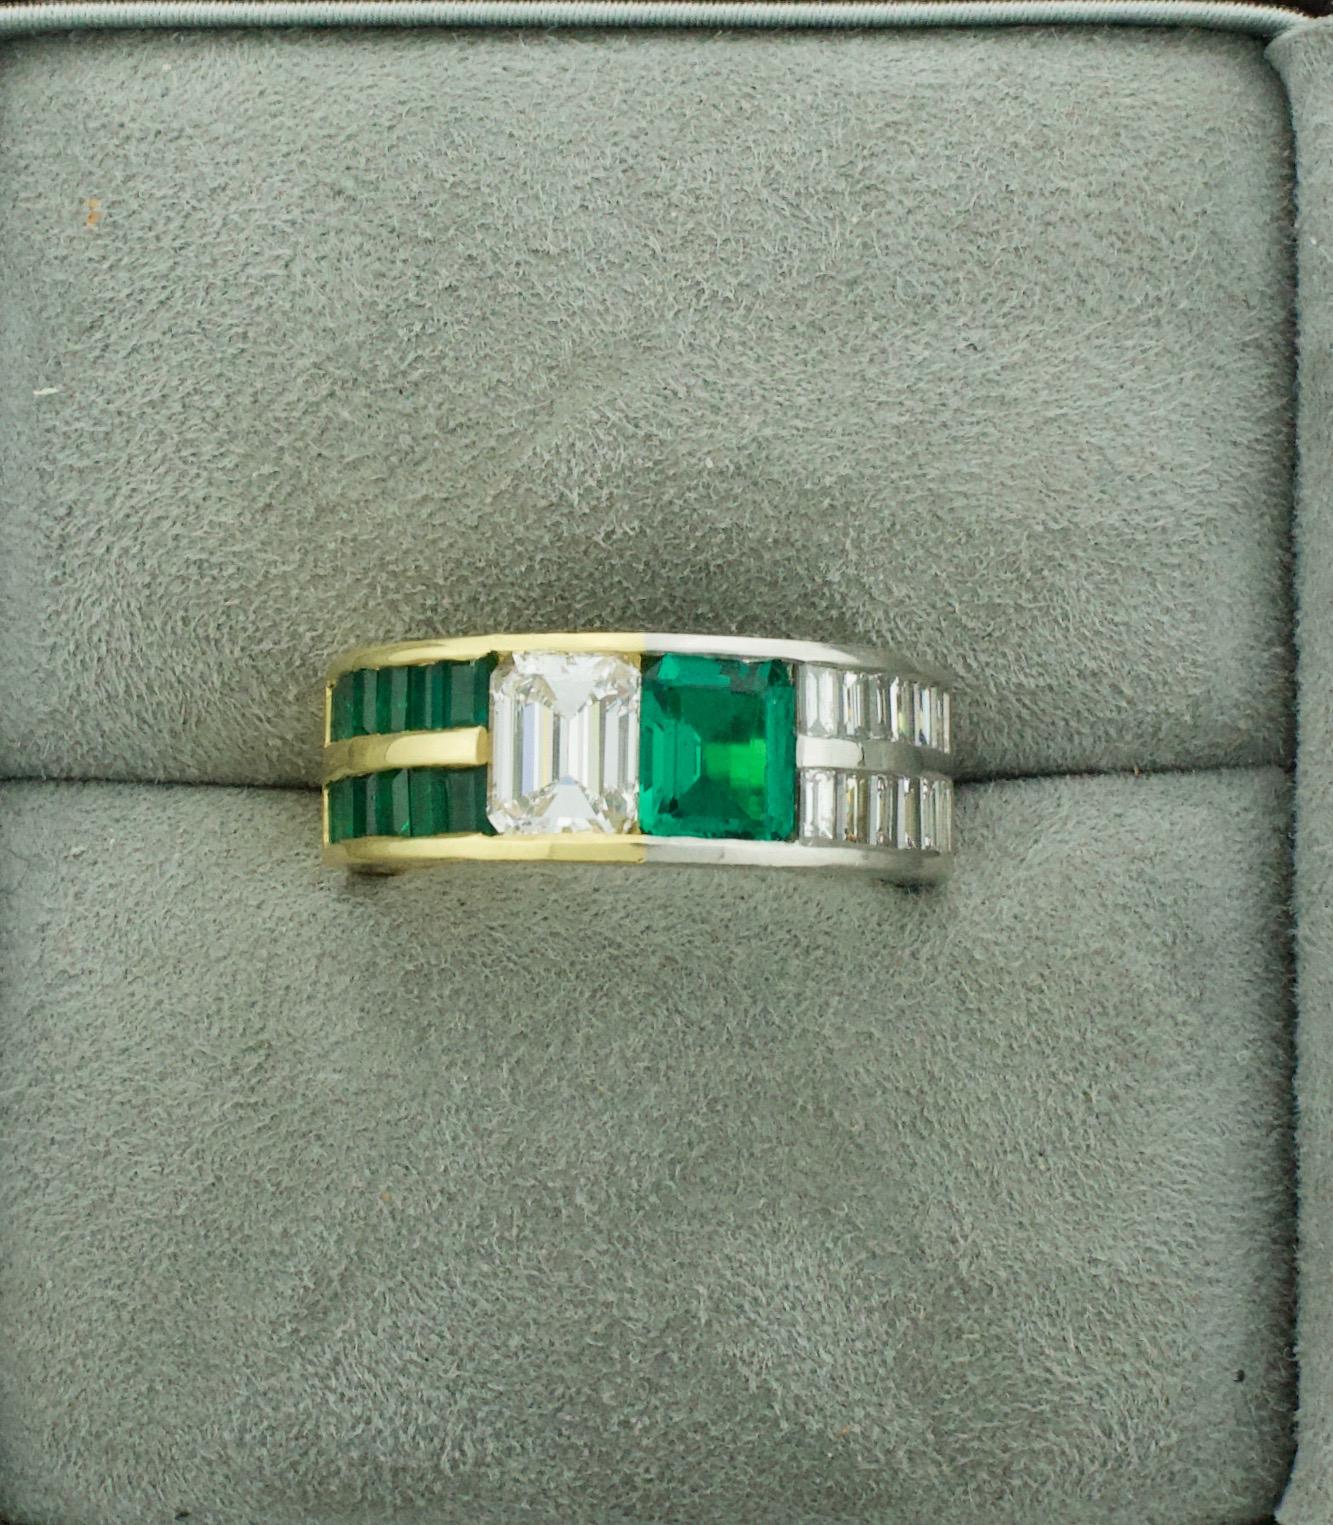 Custom Designed Emerald and Diamond Wedding Band in 18k Gold and Platinum
Size 10
Extremely Fine Material Throughout 
One Emerald Cut Diamond weighing 1.30 carats approximately [GHI VS1]
One Emerald Cut Emerald weighing 1.05 carats approximately